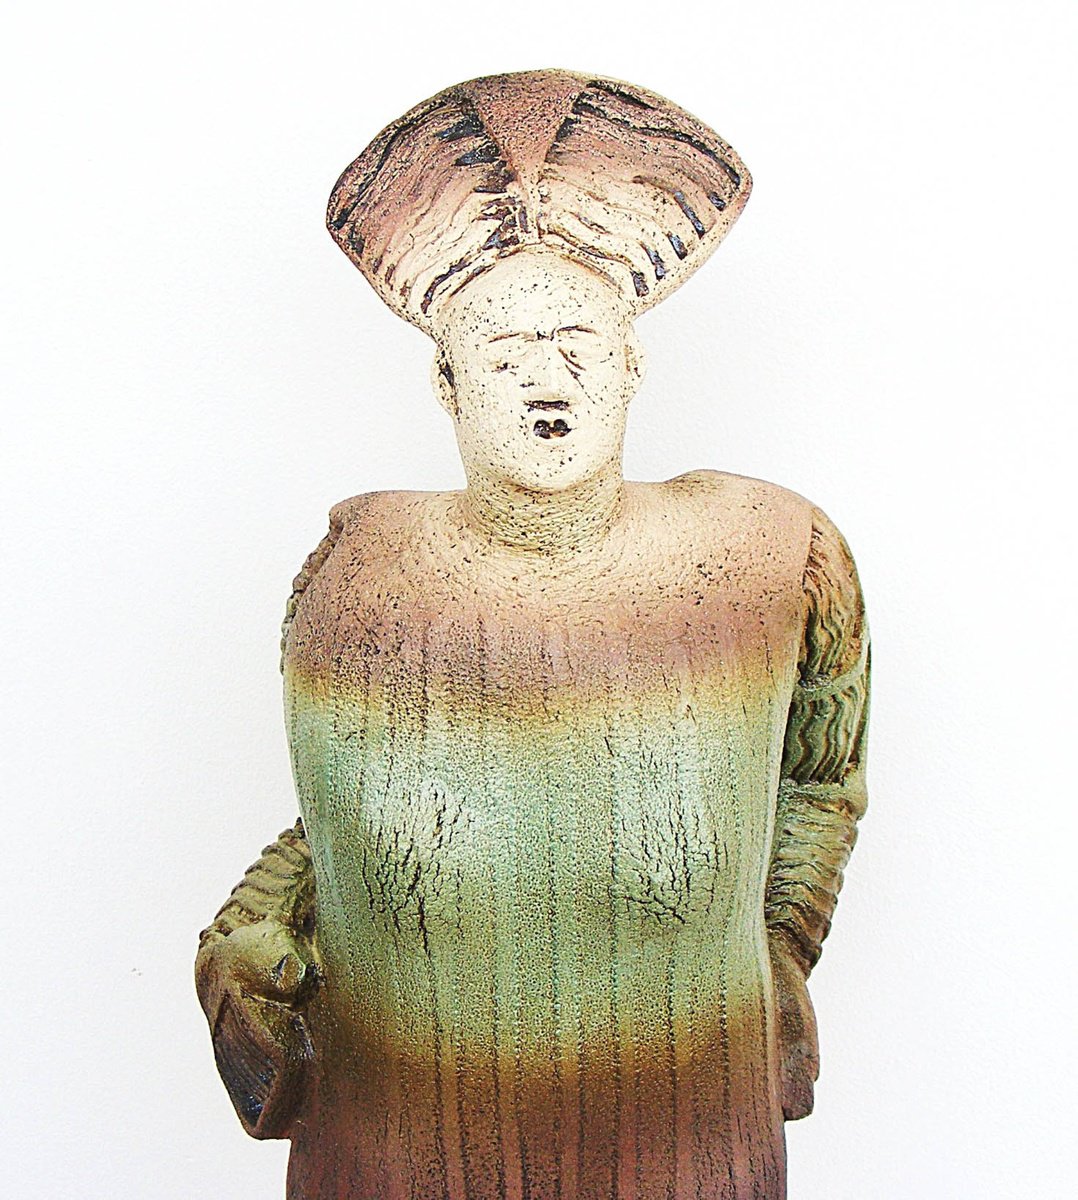 Ceramic Sculpture  -  Calypso, a beautiful nymph in Homer’s Odyssey by Dick Martin